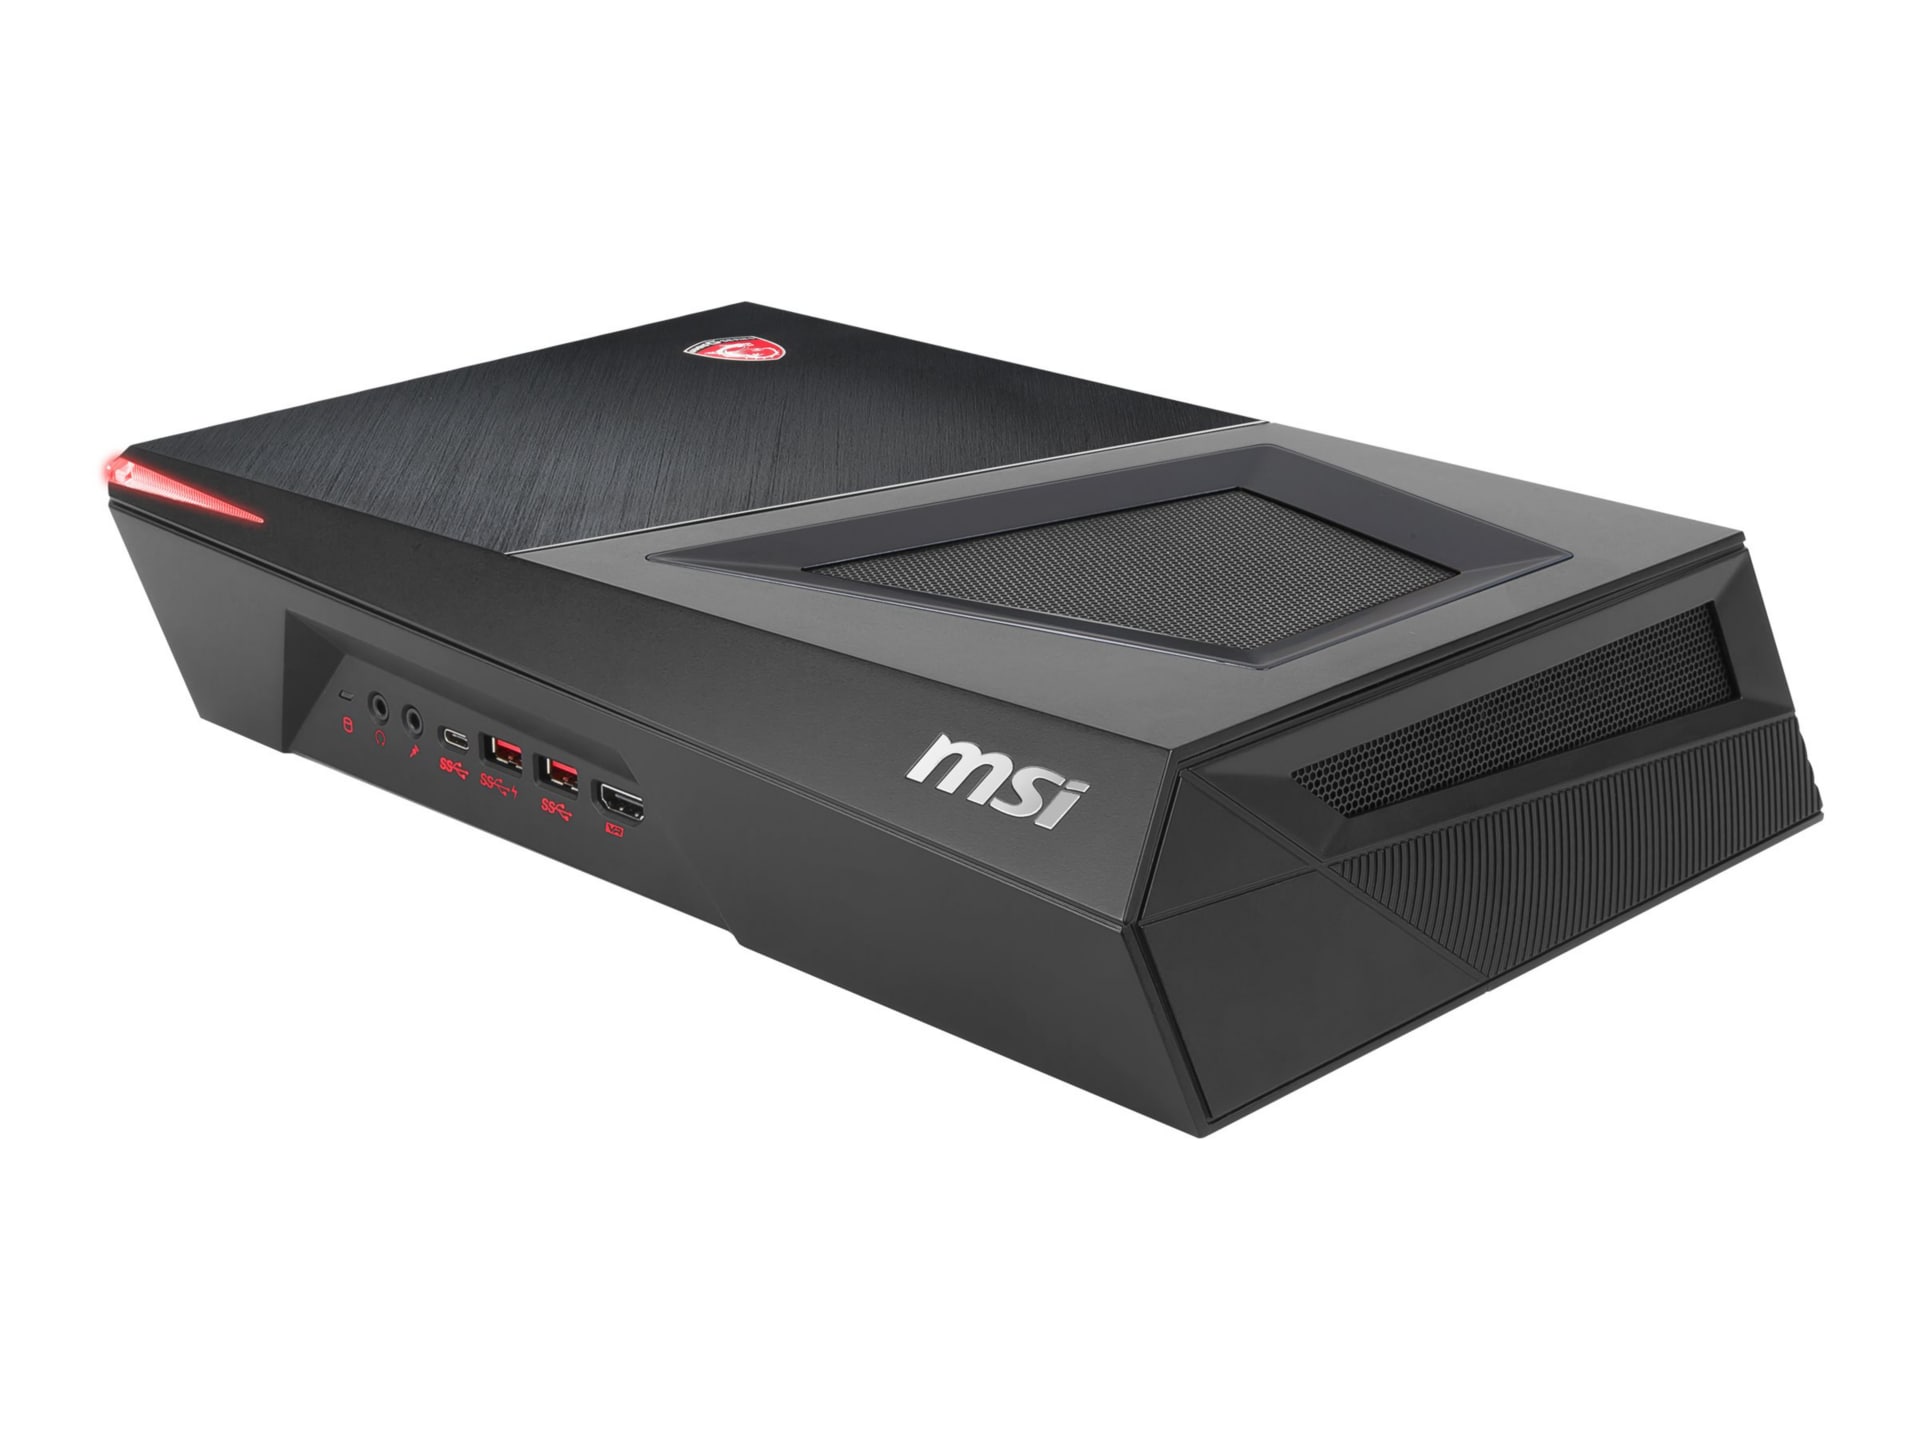 MSI Trident 3 VR7RD 081US - DTS - Core i7 7700 3.6 GHz - 16 GB - 512 GB